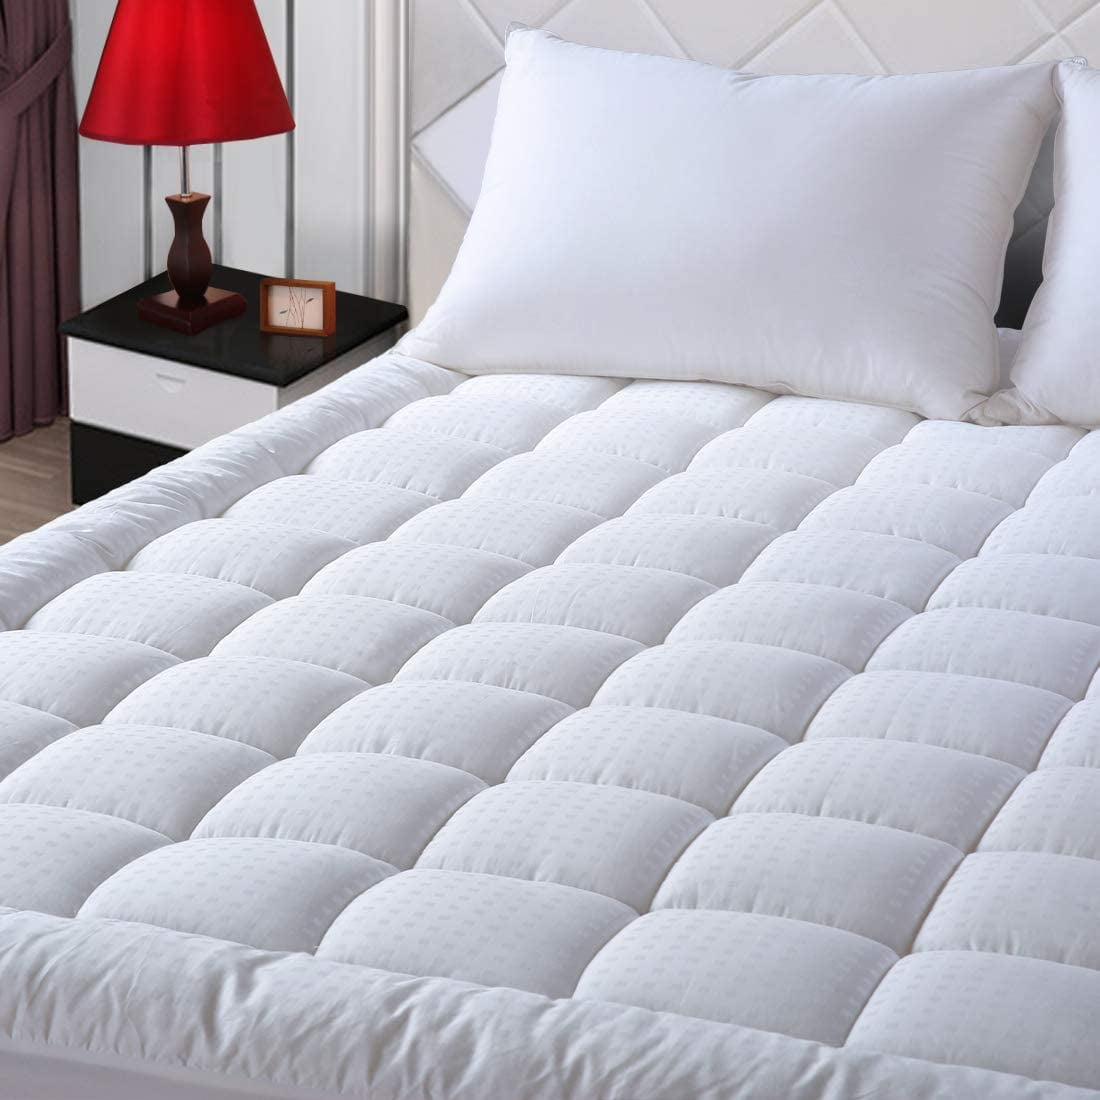 Deep Pocket Fits 8-21 Thick Mattress Meritlife Queen Mattress Pad Cooling Mattress Topper Pillow Top Fitted Quilted Mattress Cover with Fitted Skirt Stretches Up to 21 Inches